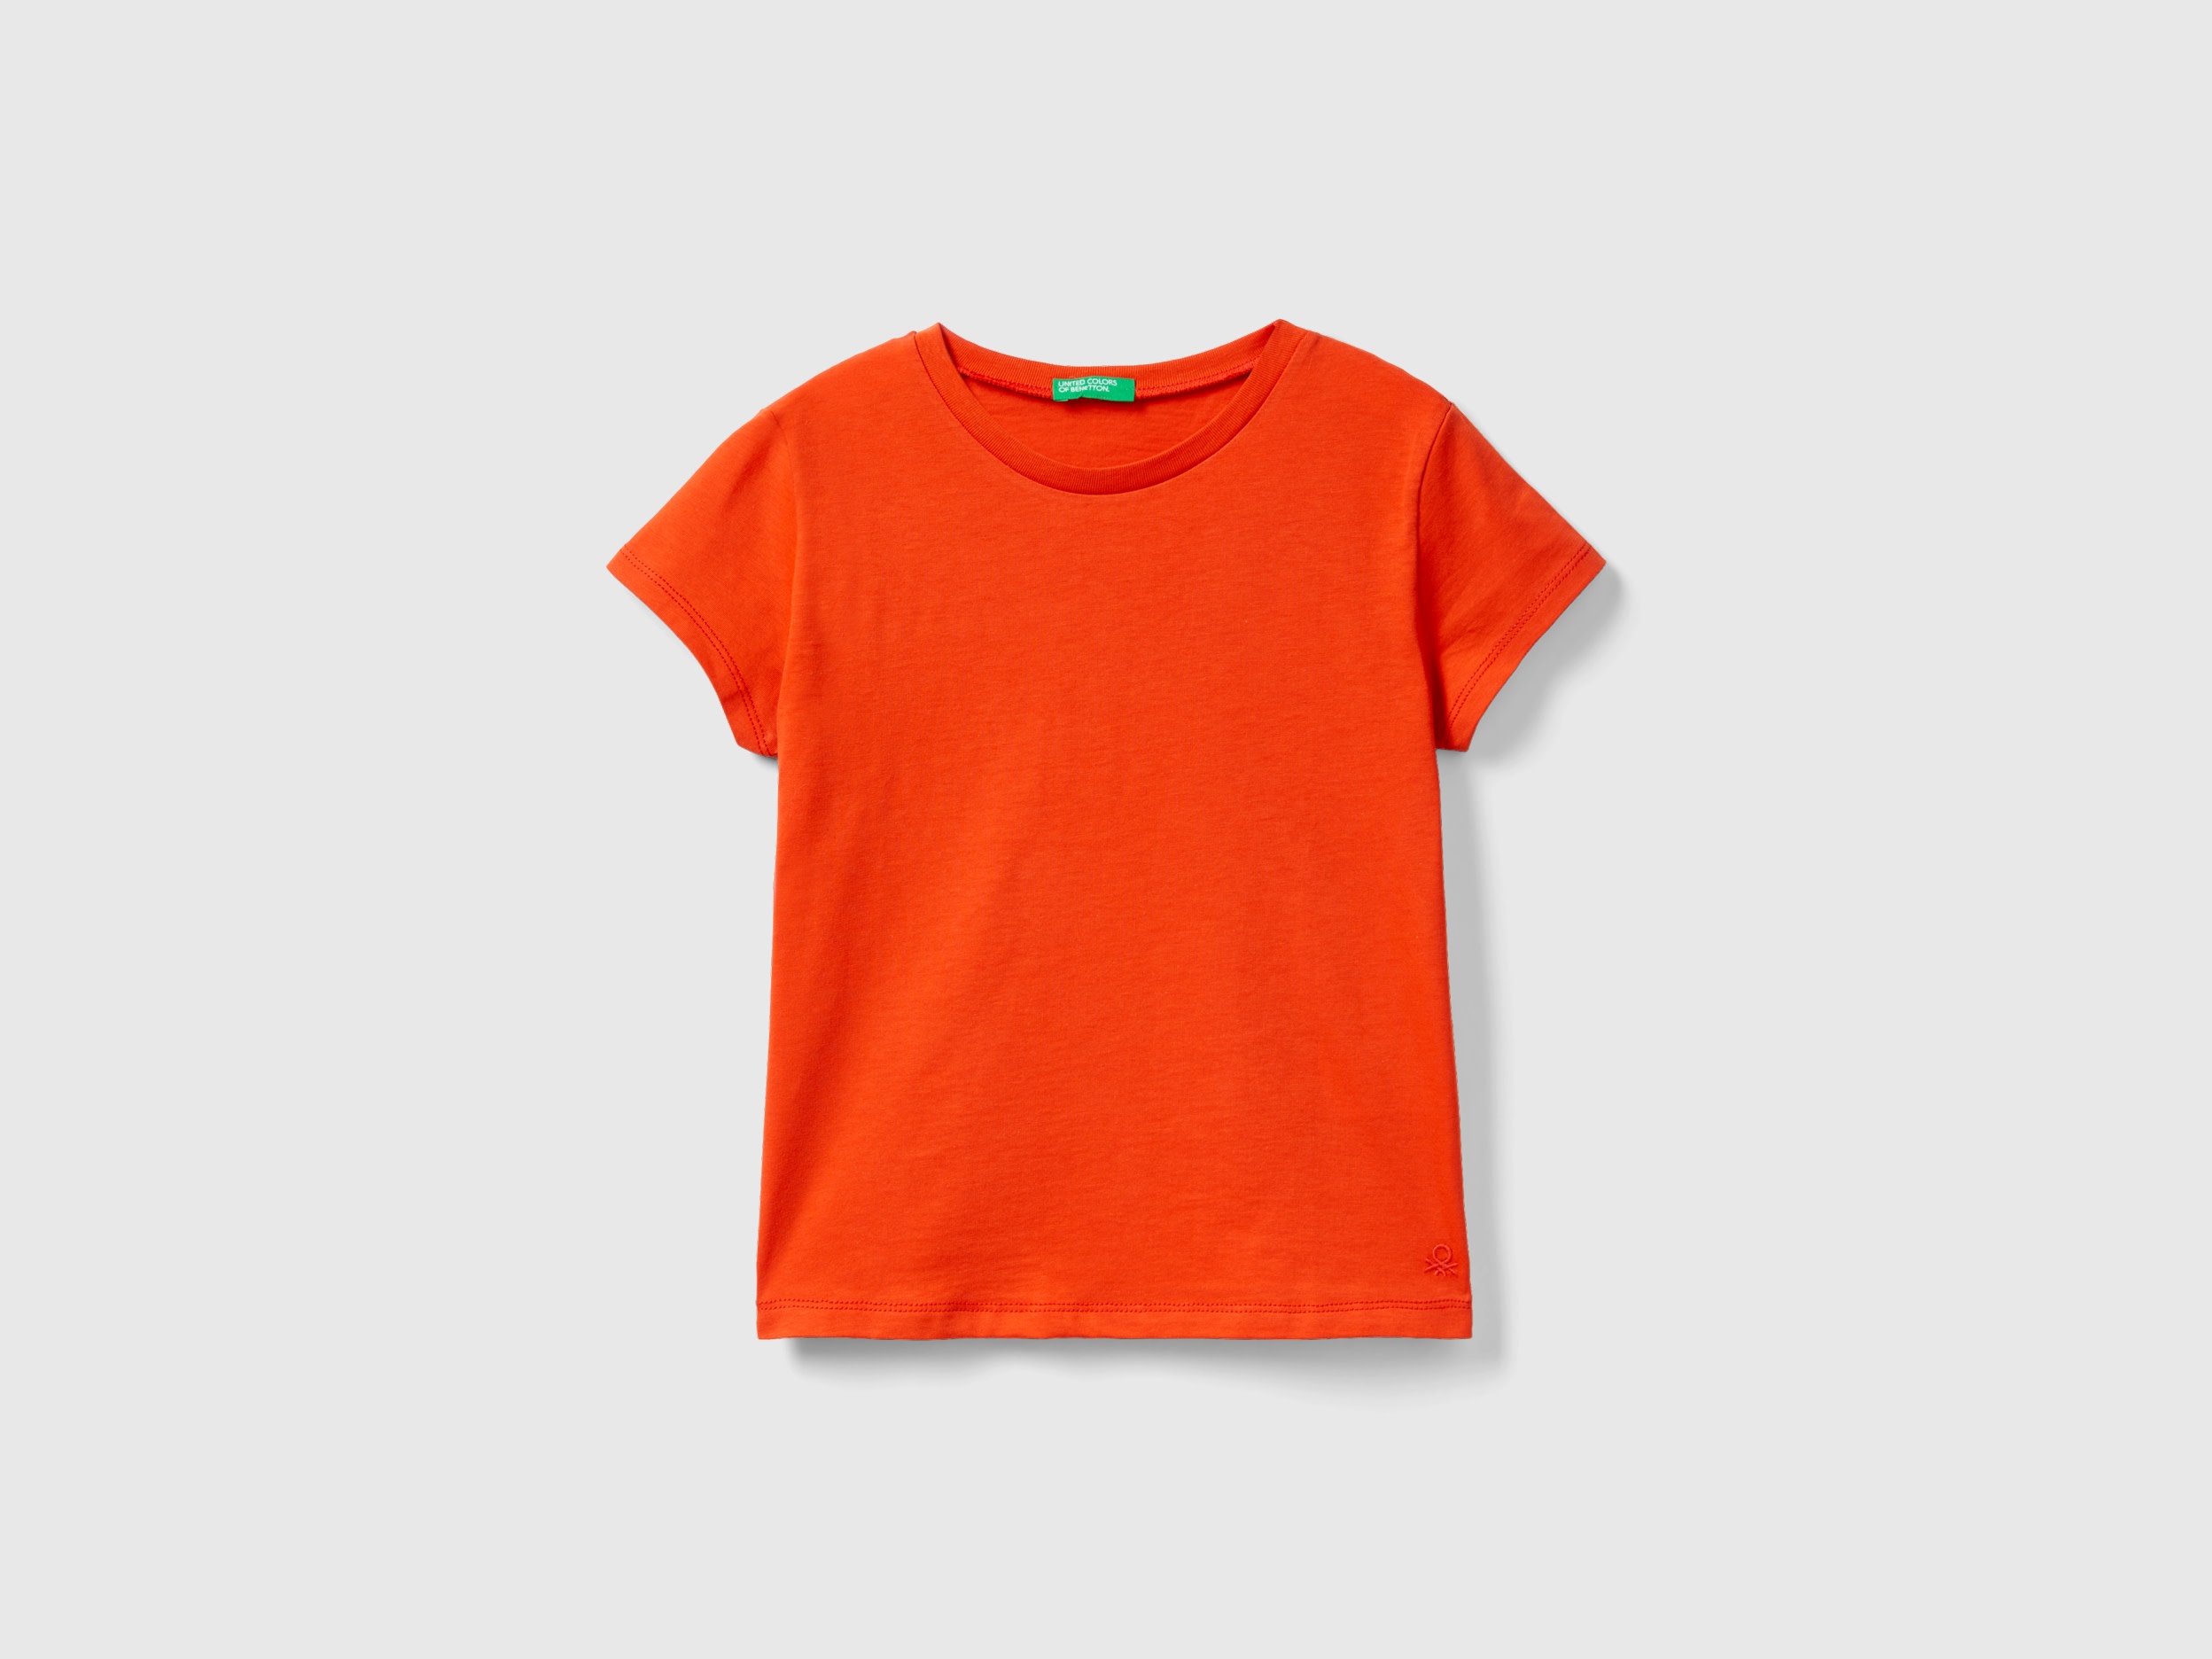 Benetton, T-shirt In Pure Organic Cotton, size 2XL, Red, Kids